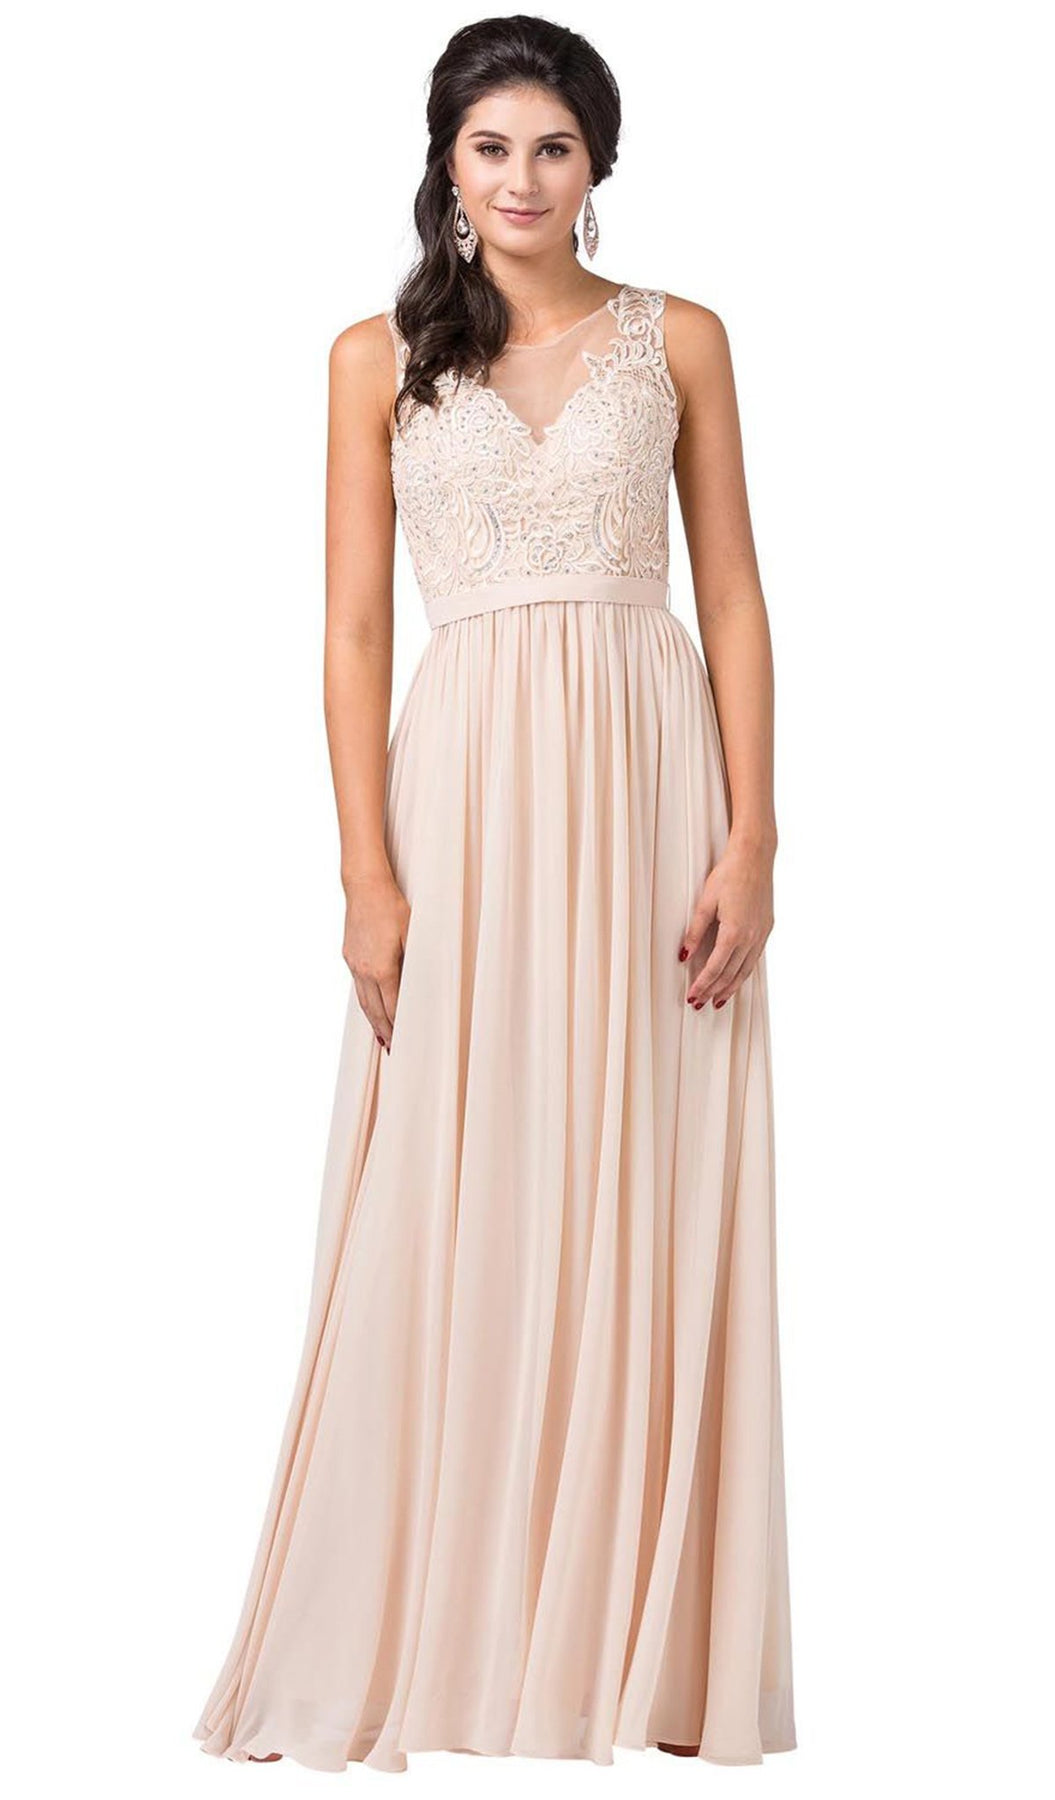 Dancing Queen - 2677 Illusion Neckline Beaded Lace Bodice Chiffon Gown In Neutral